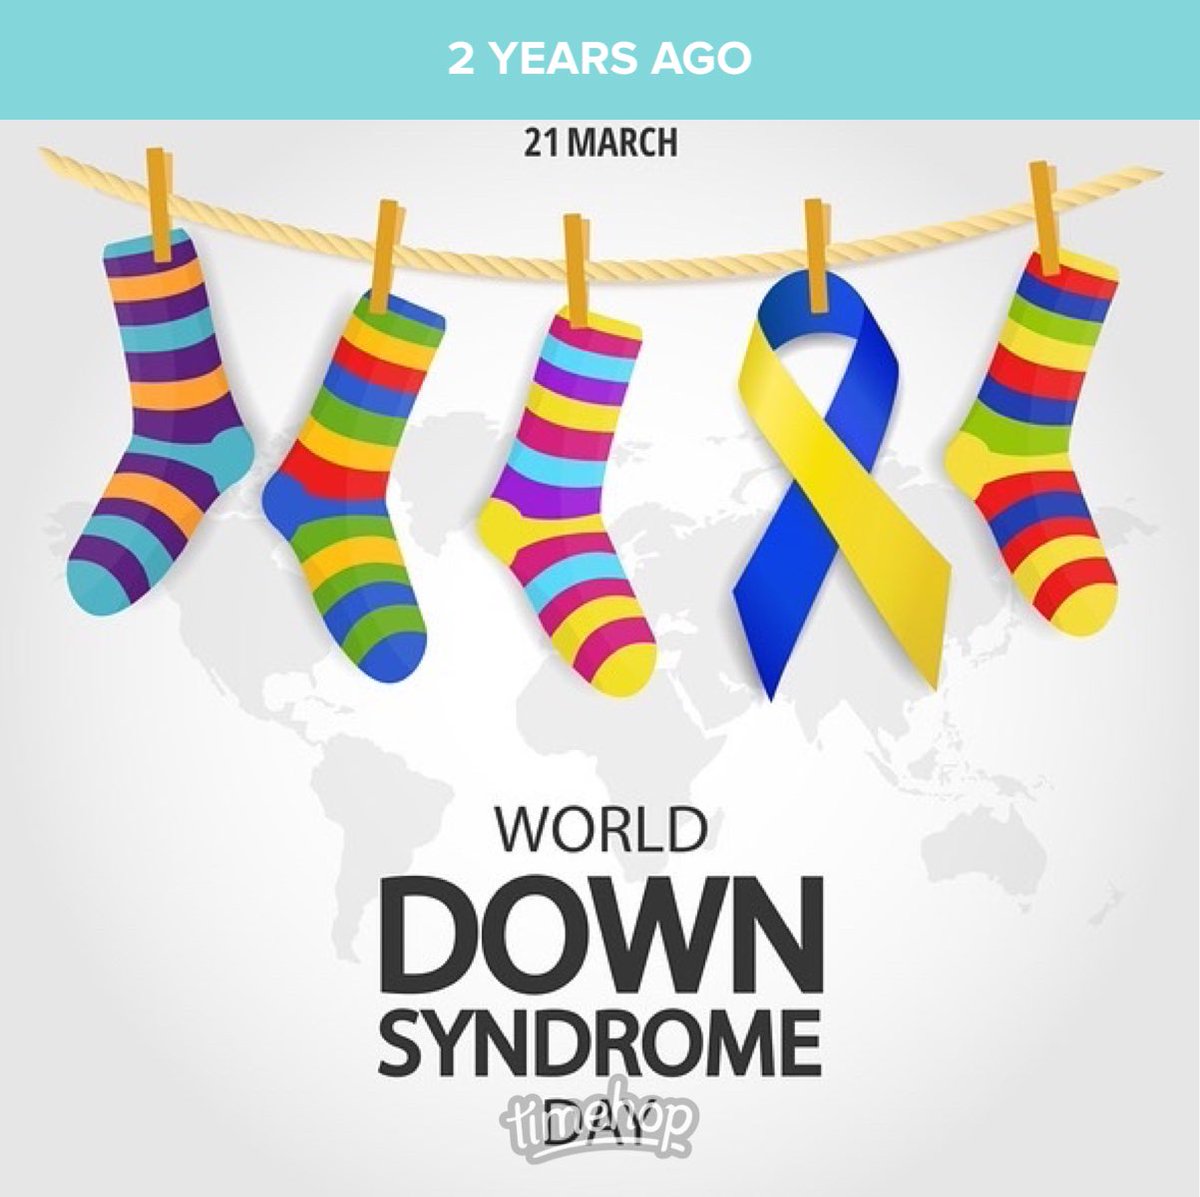 don’t forget your odd socks tomorrow x #DownSyndromeAwareness♥️